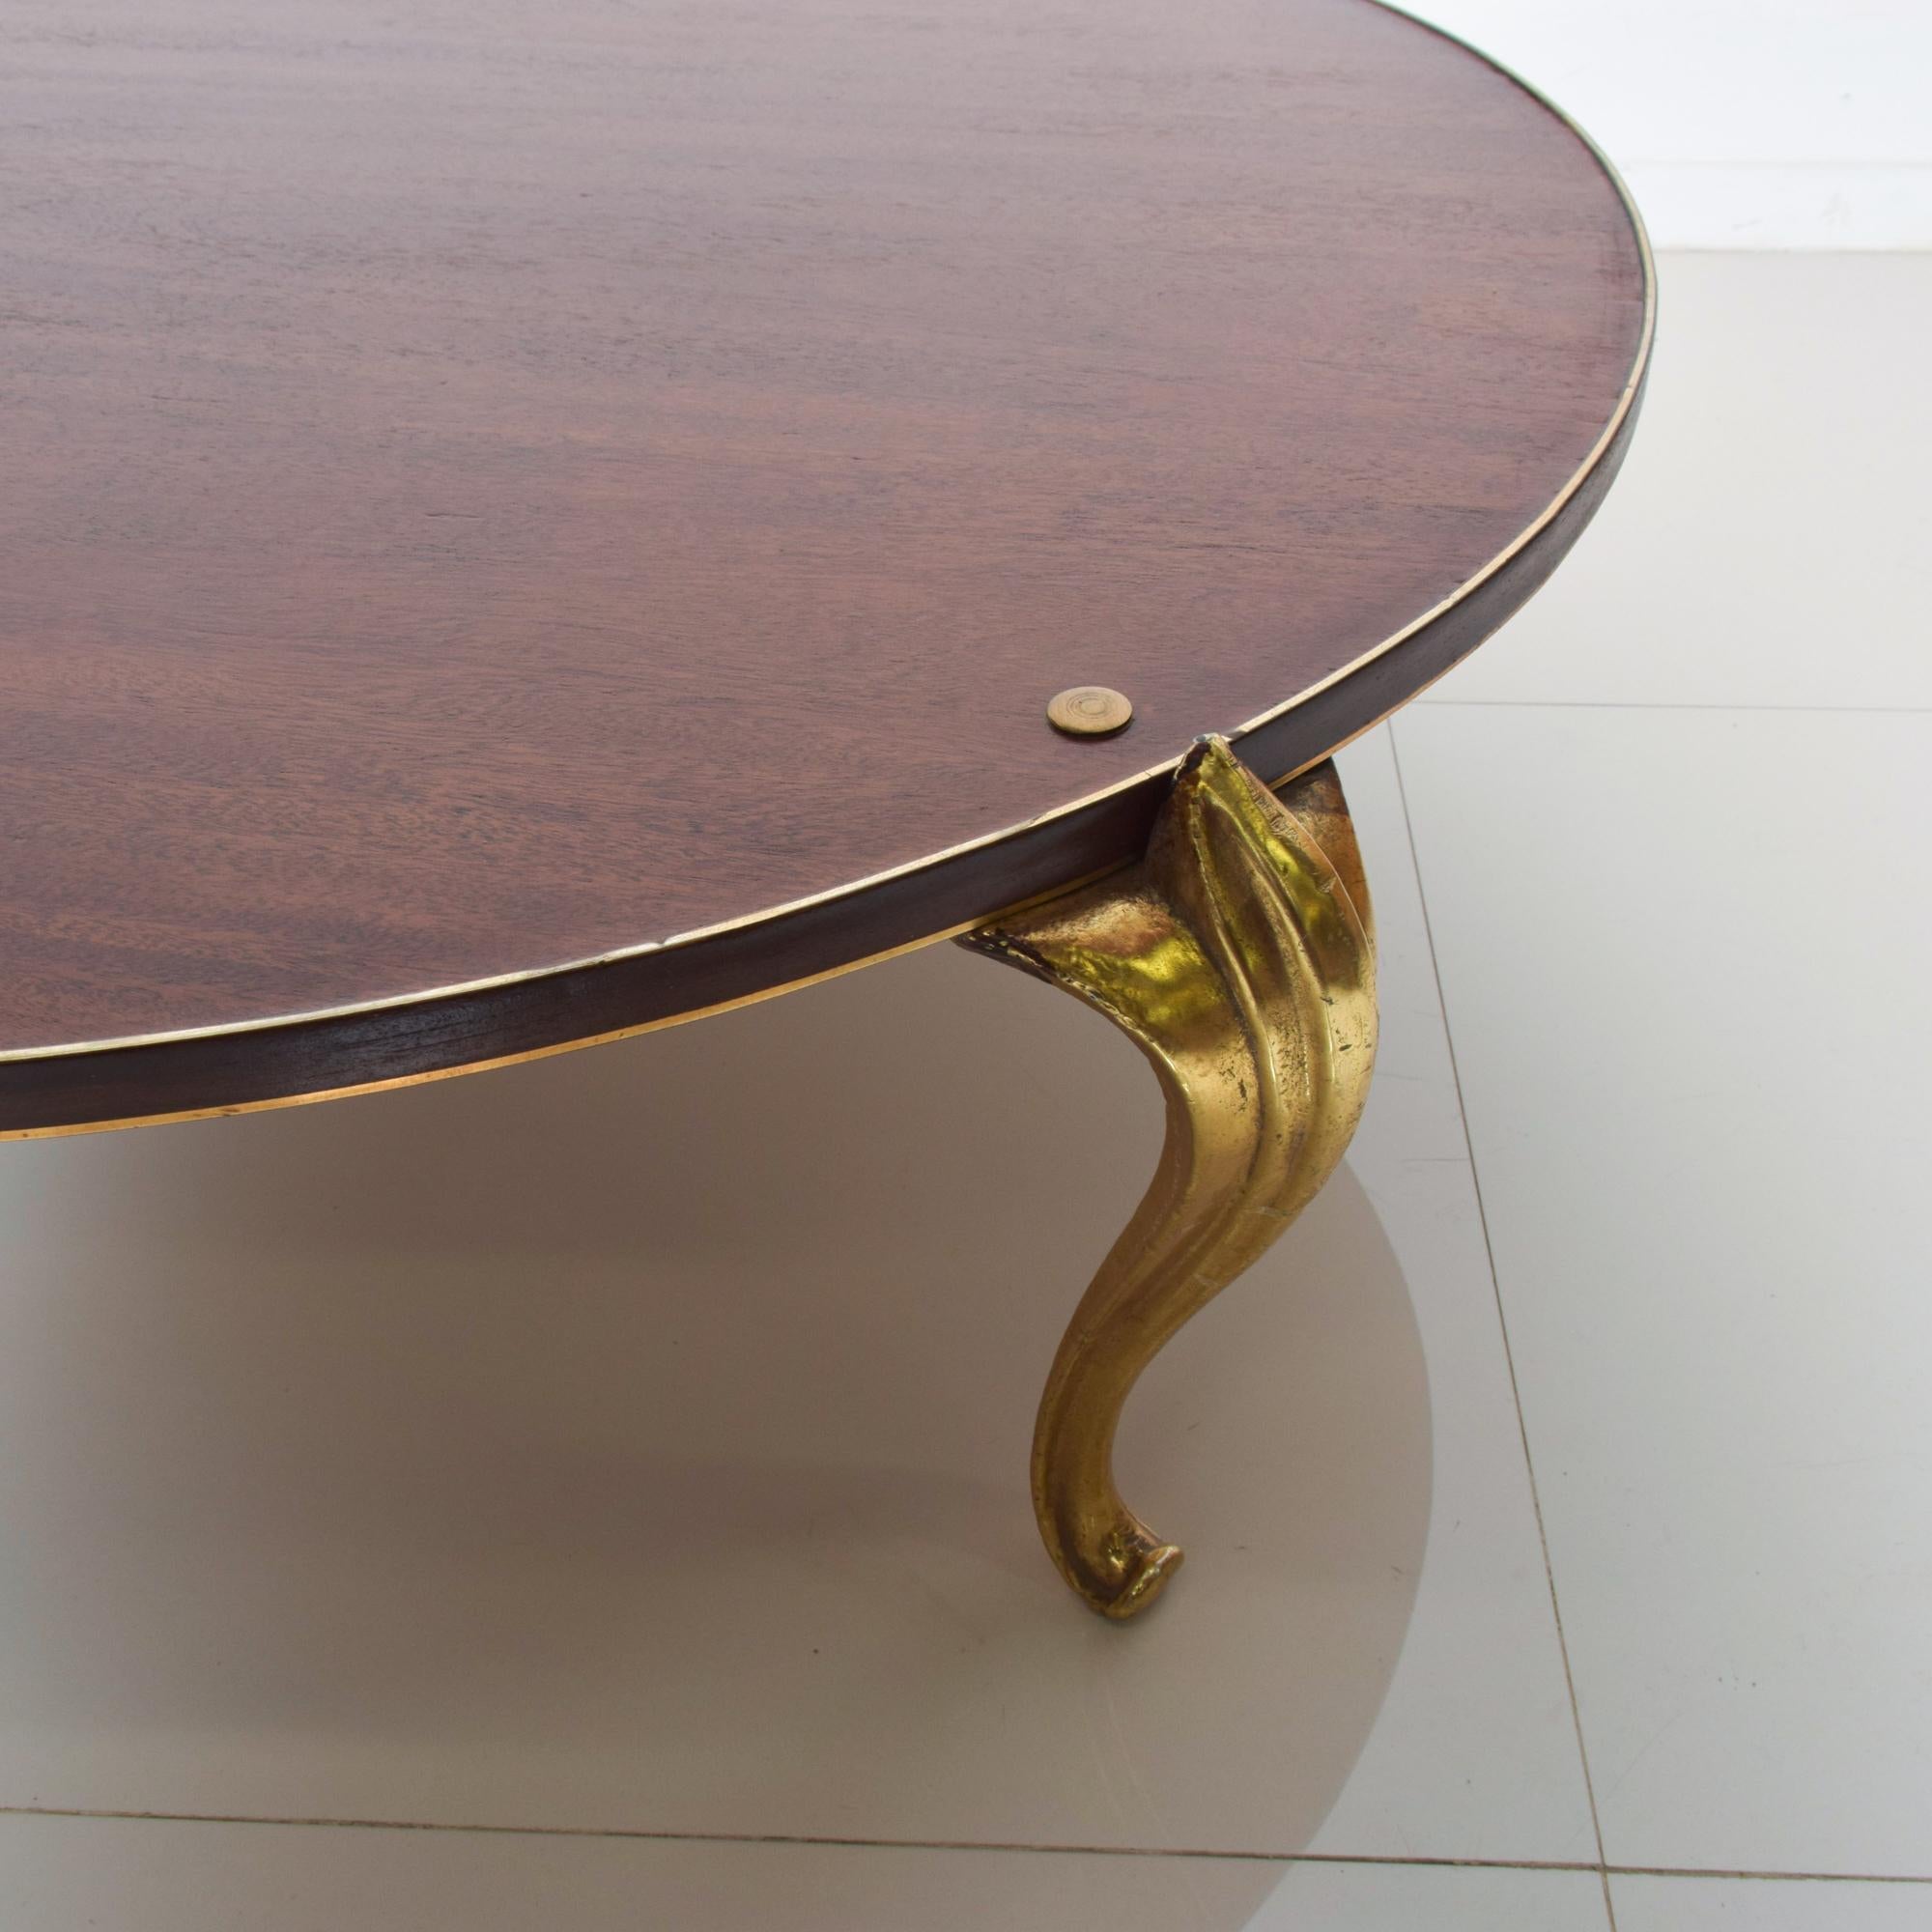 Bespoke Butterfly Inlay Round Wood Coffee Table Gold Trim Gilded Cabriole Legs In Good Condition For Sale In Chula Vista, CA